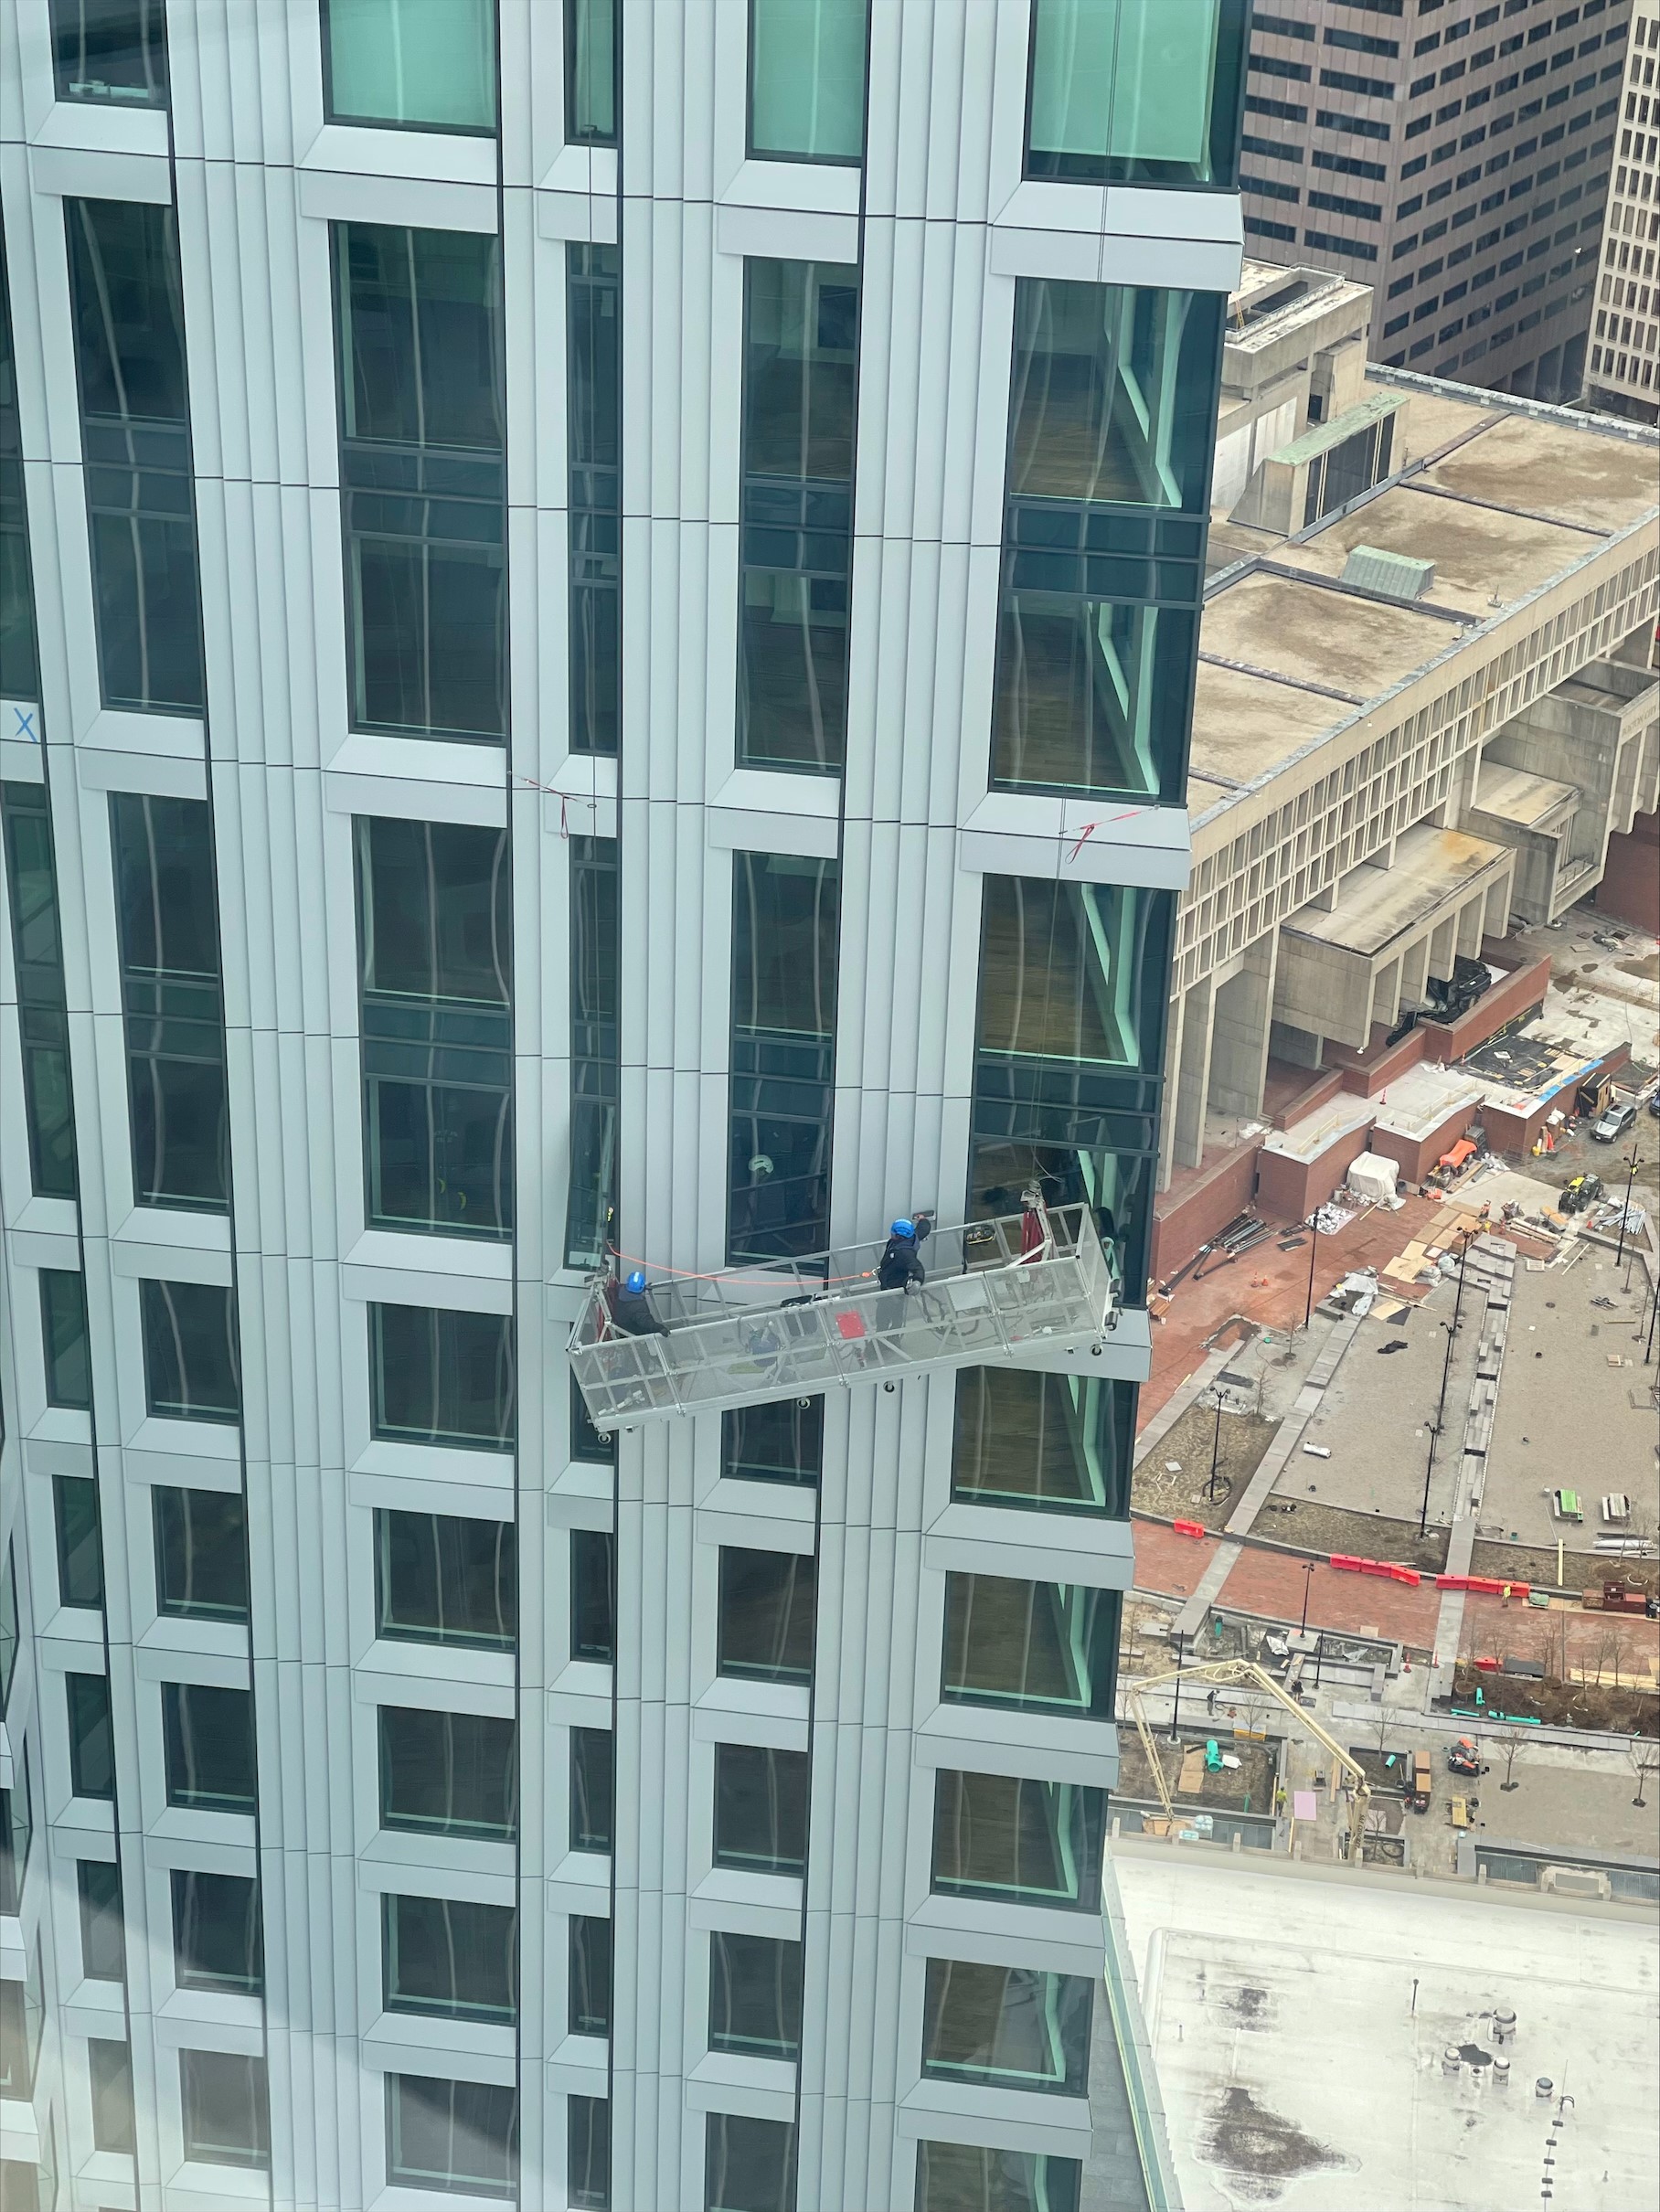 2 window cleaners rescued after being trapped outside Boston skyscraper's 42nd floor - CBS Boston